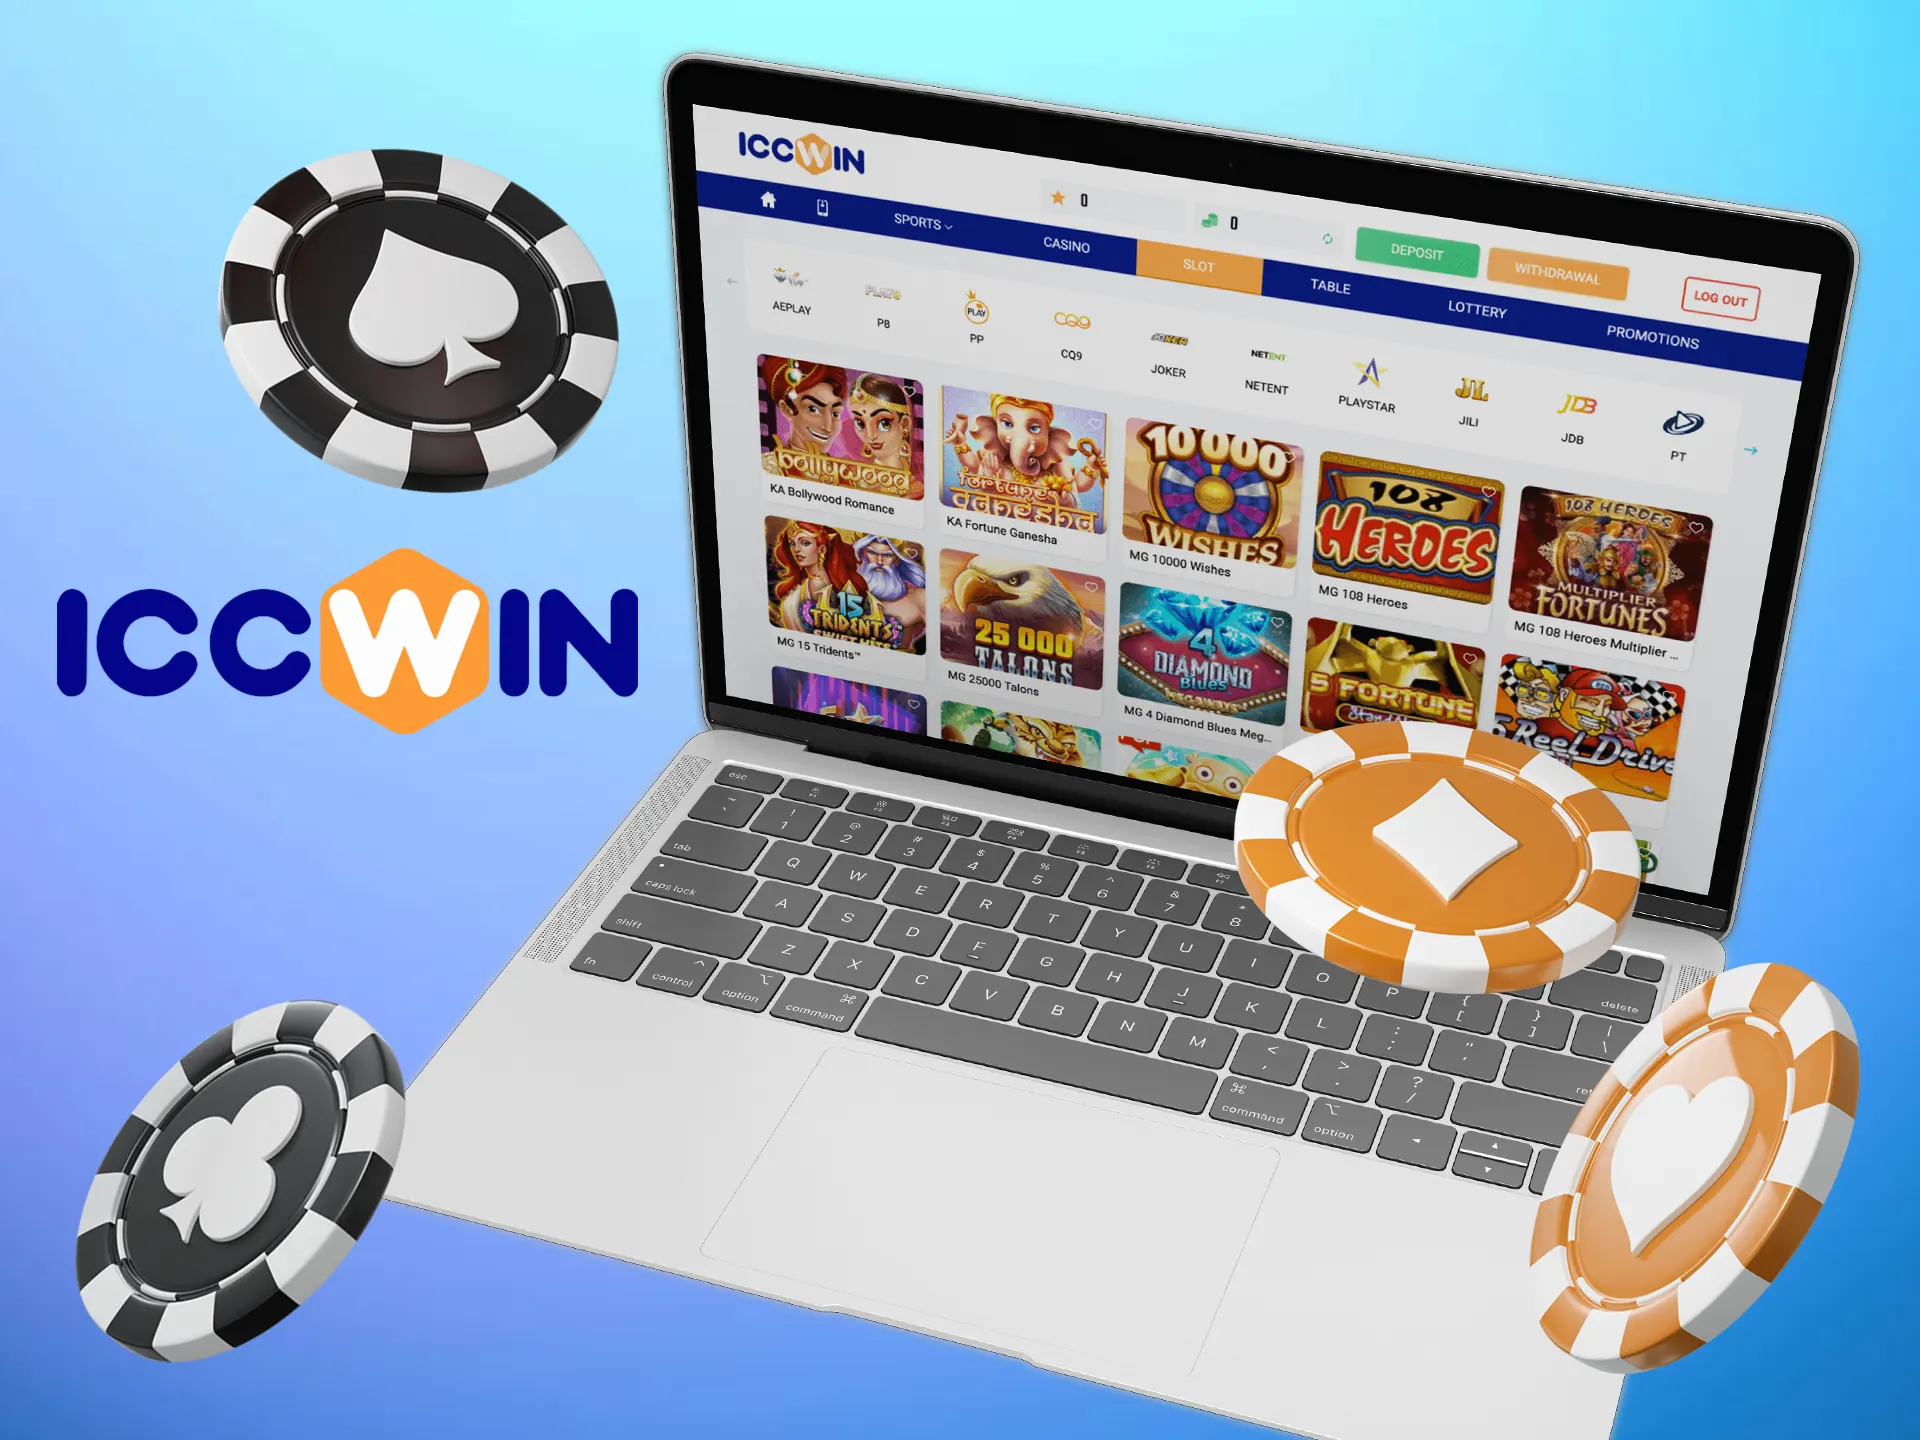 Enter on the ICCWIN casino page and start playing casino games.